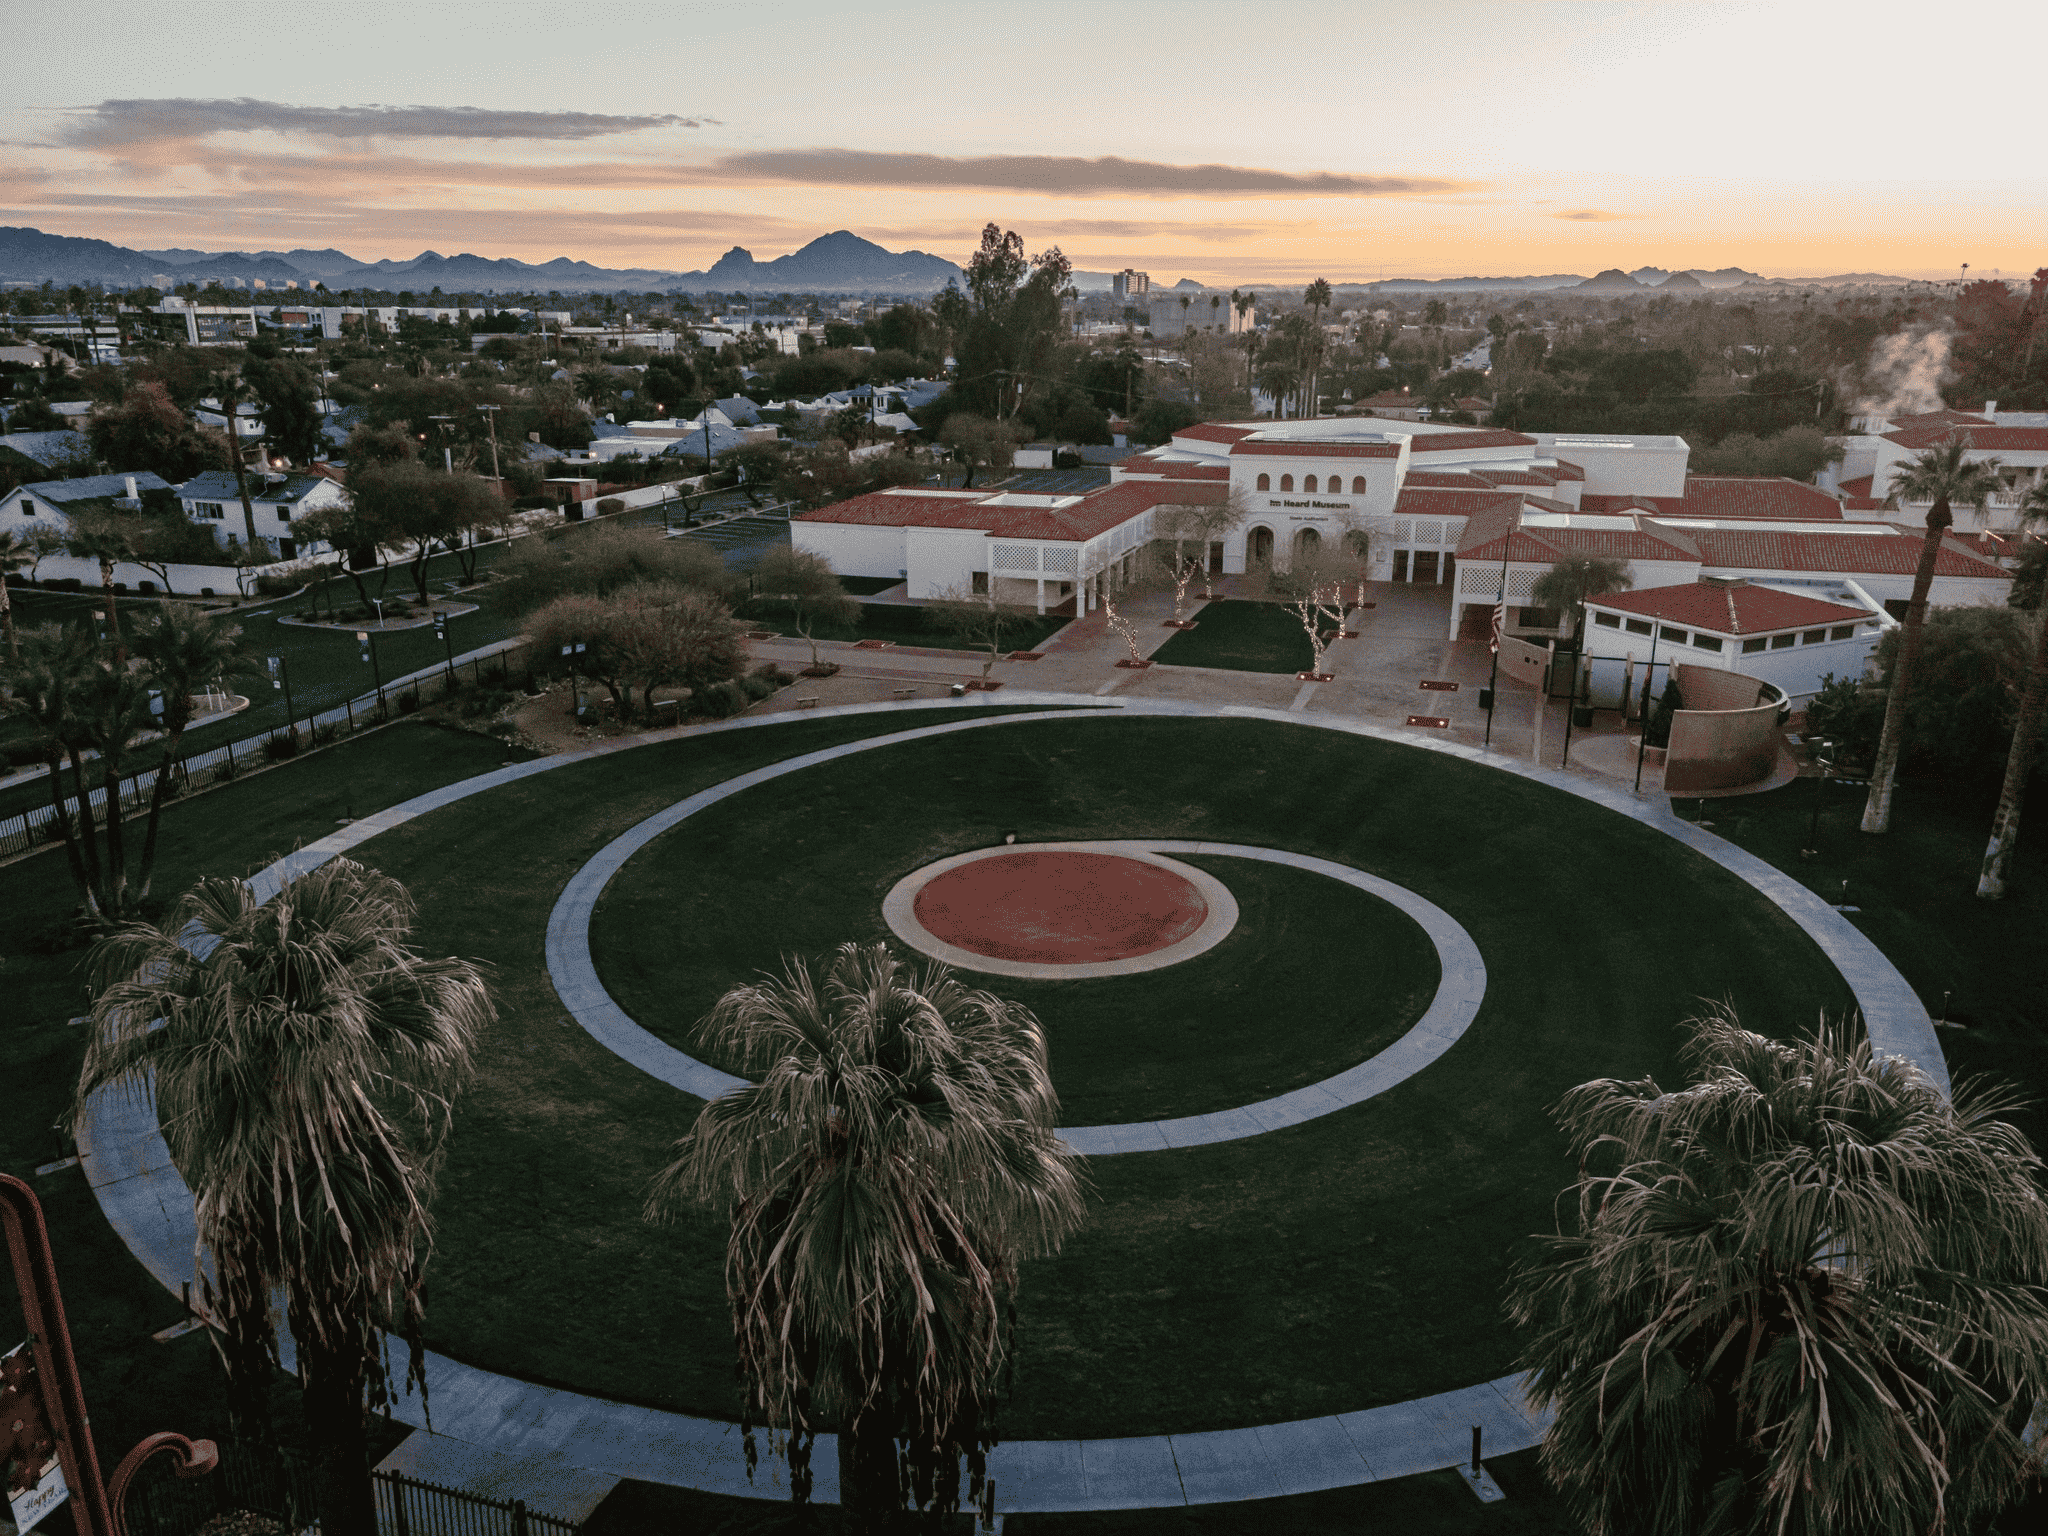 An aerial view of a circular lawn with palm trees and a building in the background.